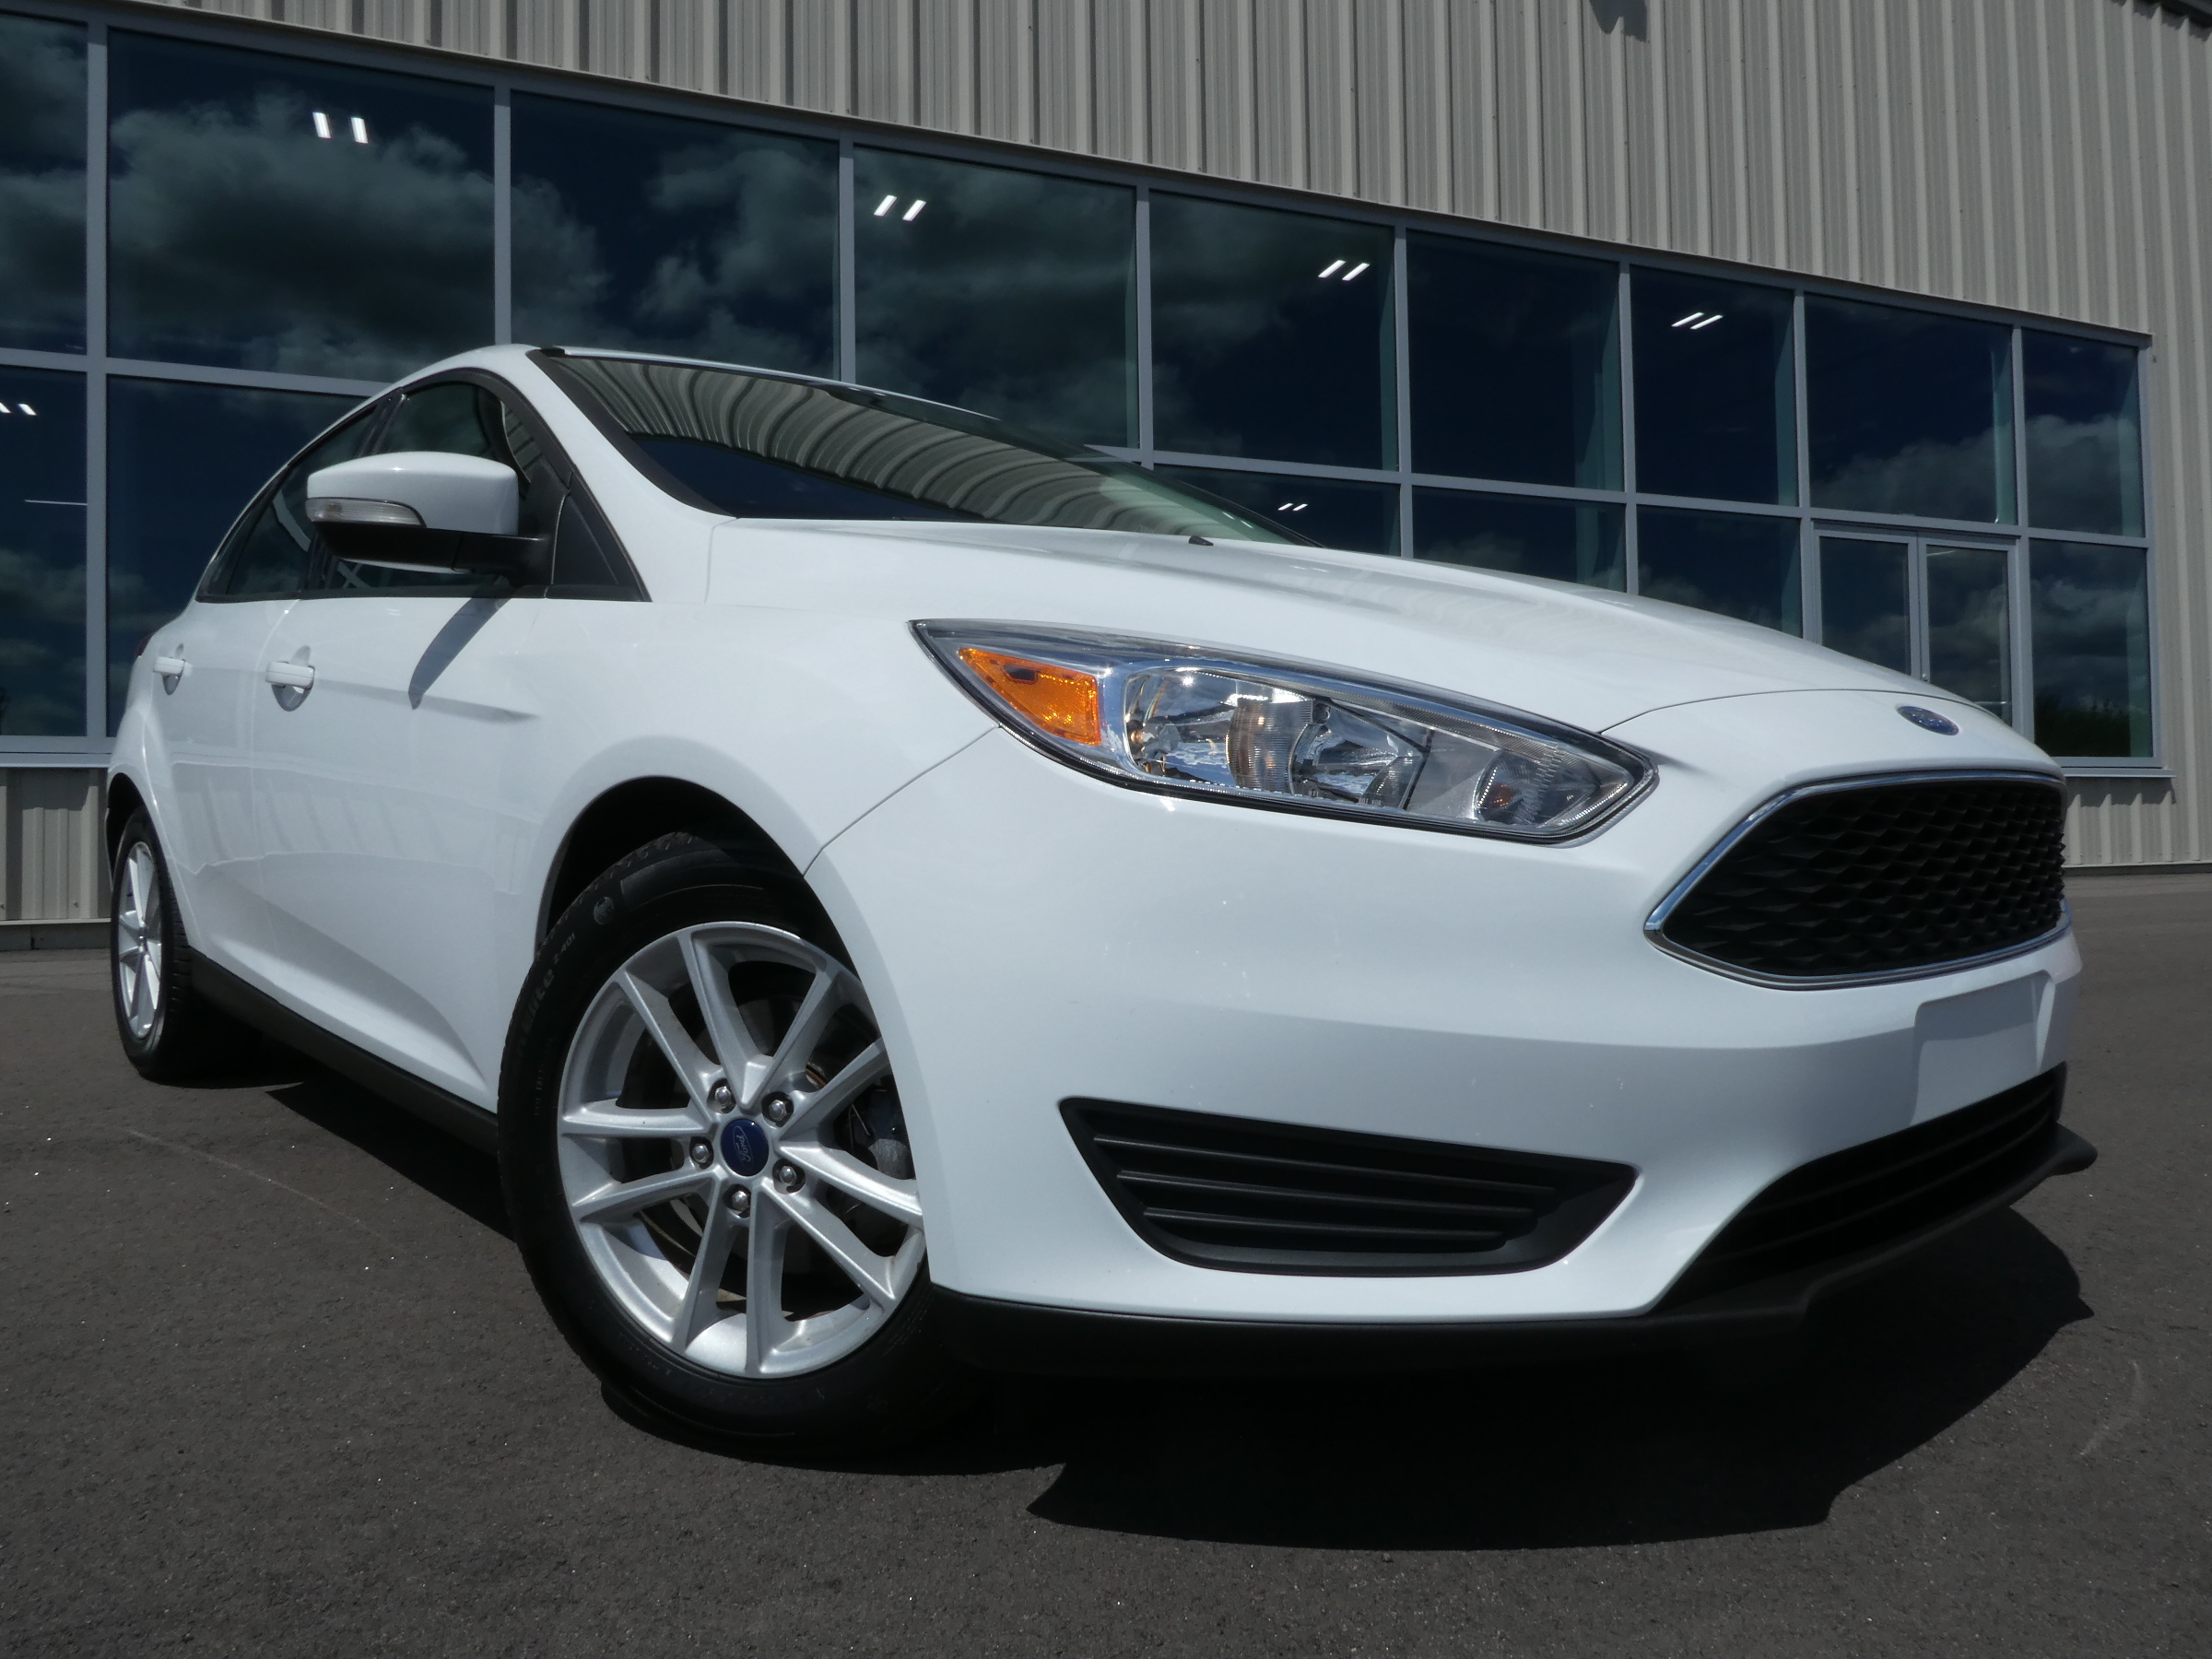 2017 Ford Focus SE, Auto, Heated Seats & Steering Wheel, Low KM's 